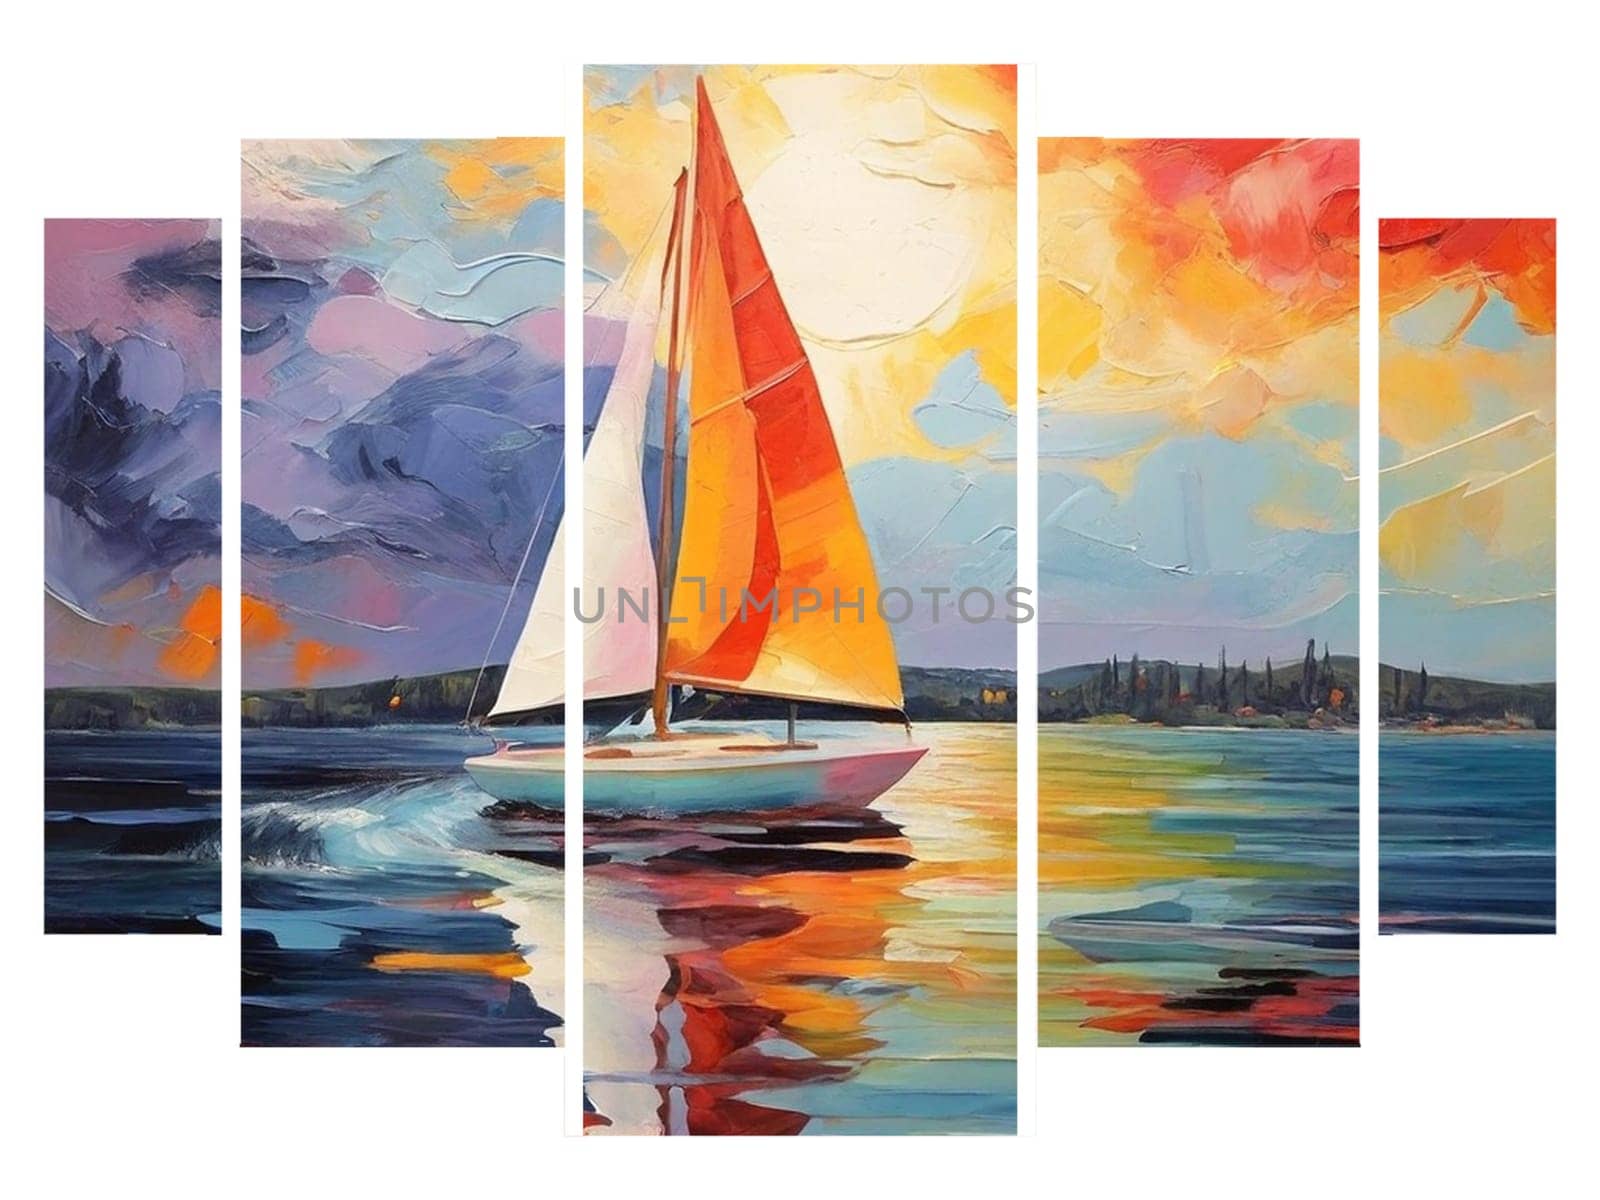 Abstract Sailboat Painting In Fauvism Style: by Vailatese46